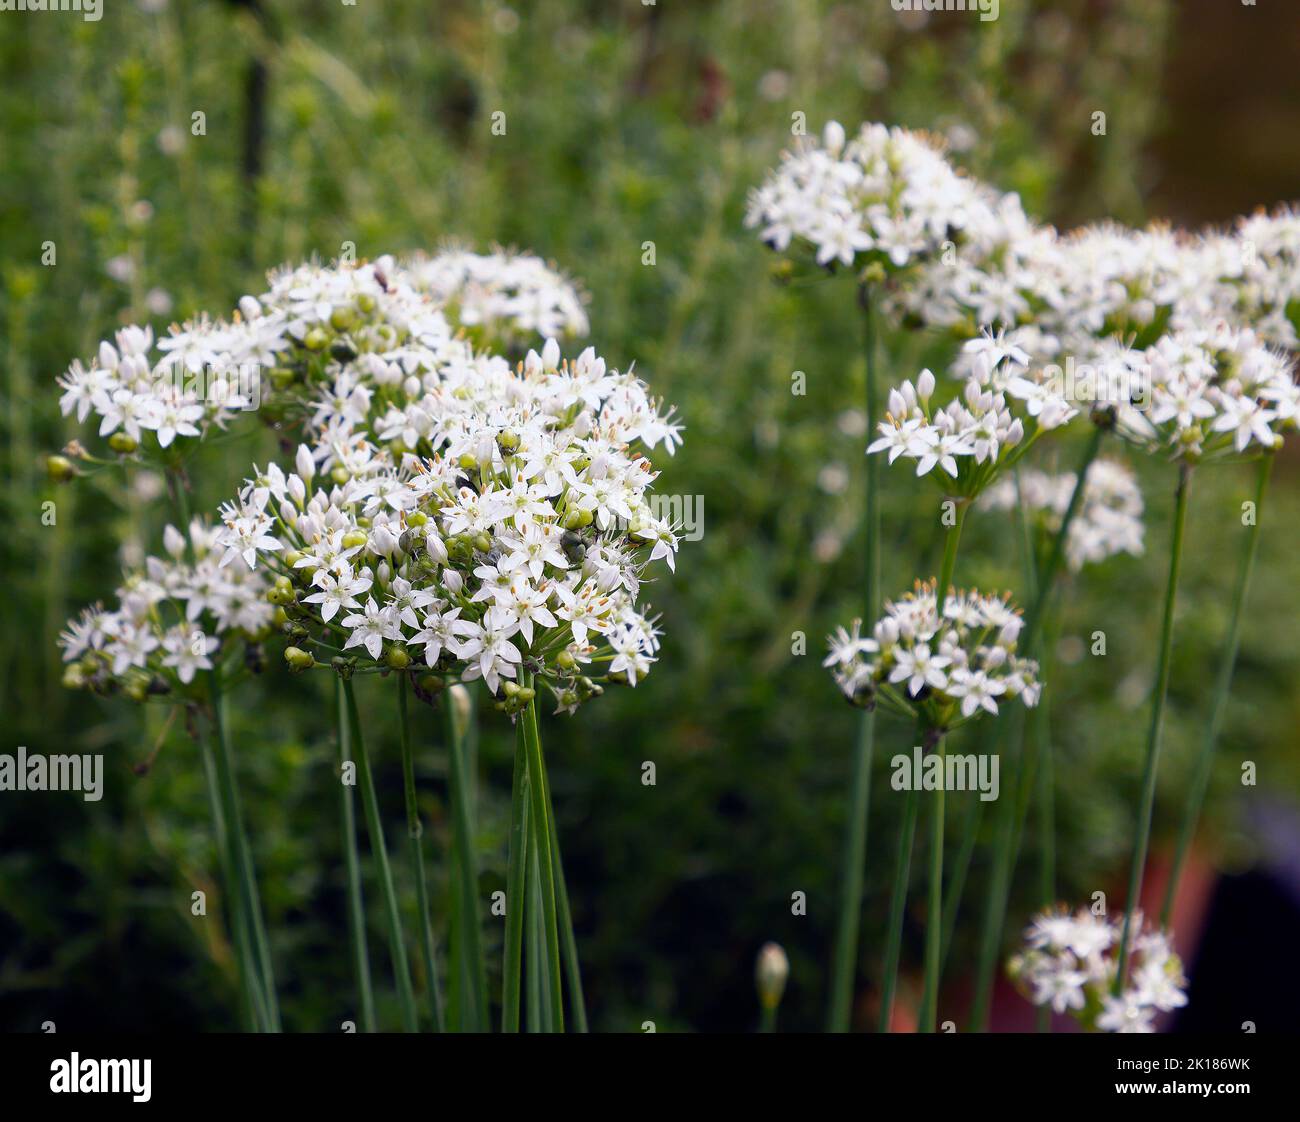 Close up of the white flowers of the flowering garden bulb Allium tuberosum seen in the UK. Stock Photo